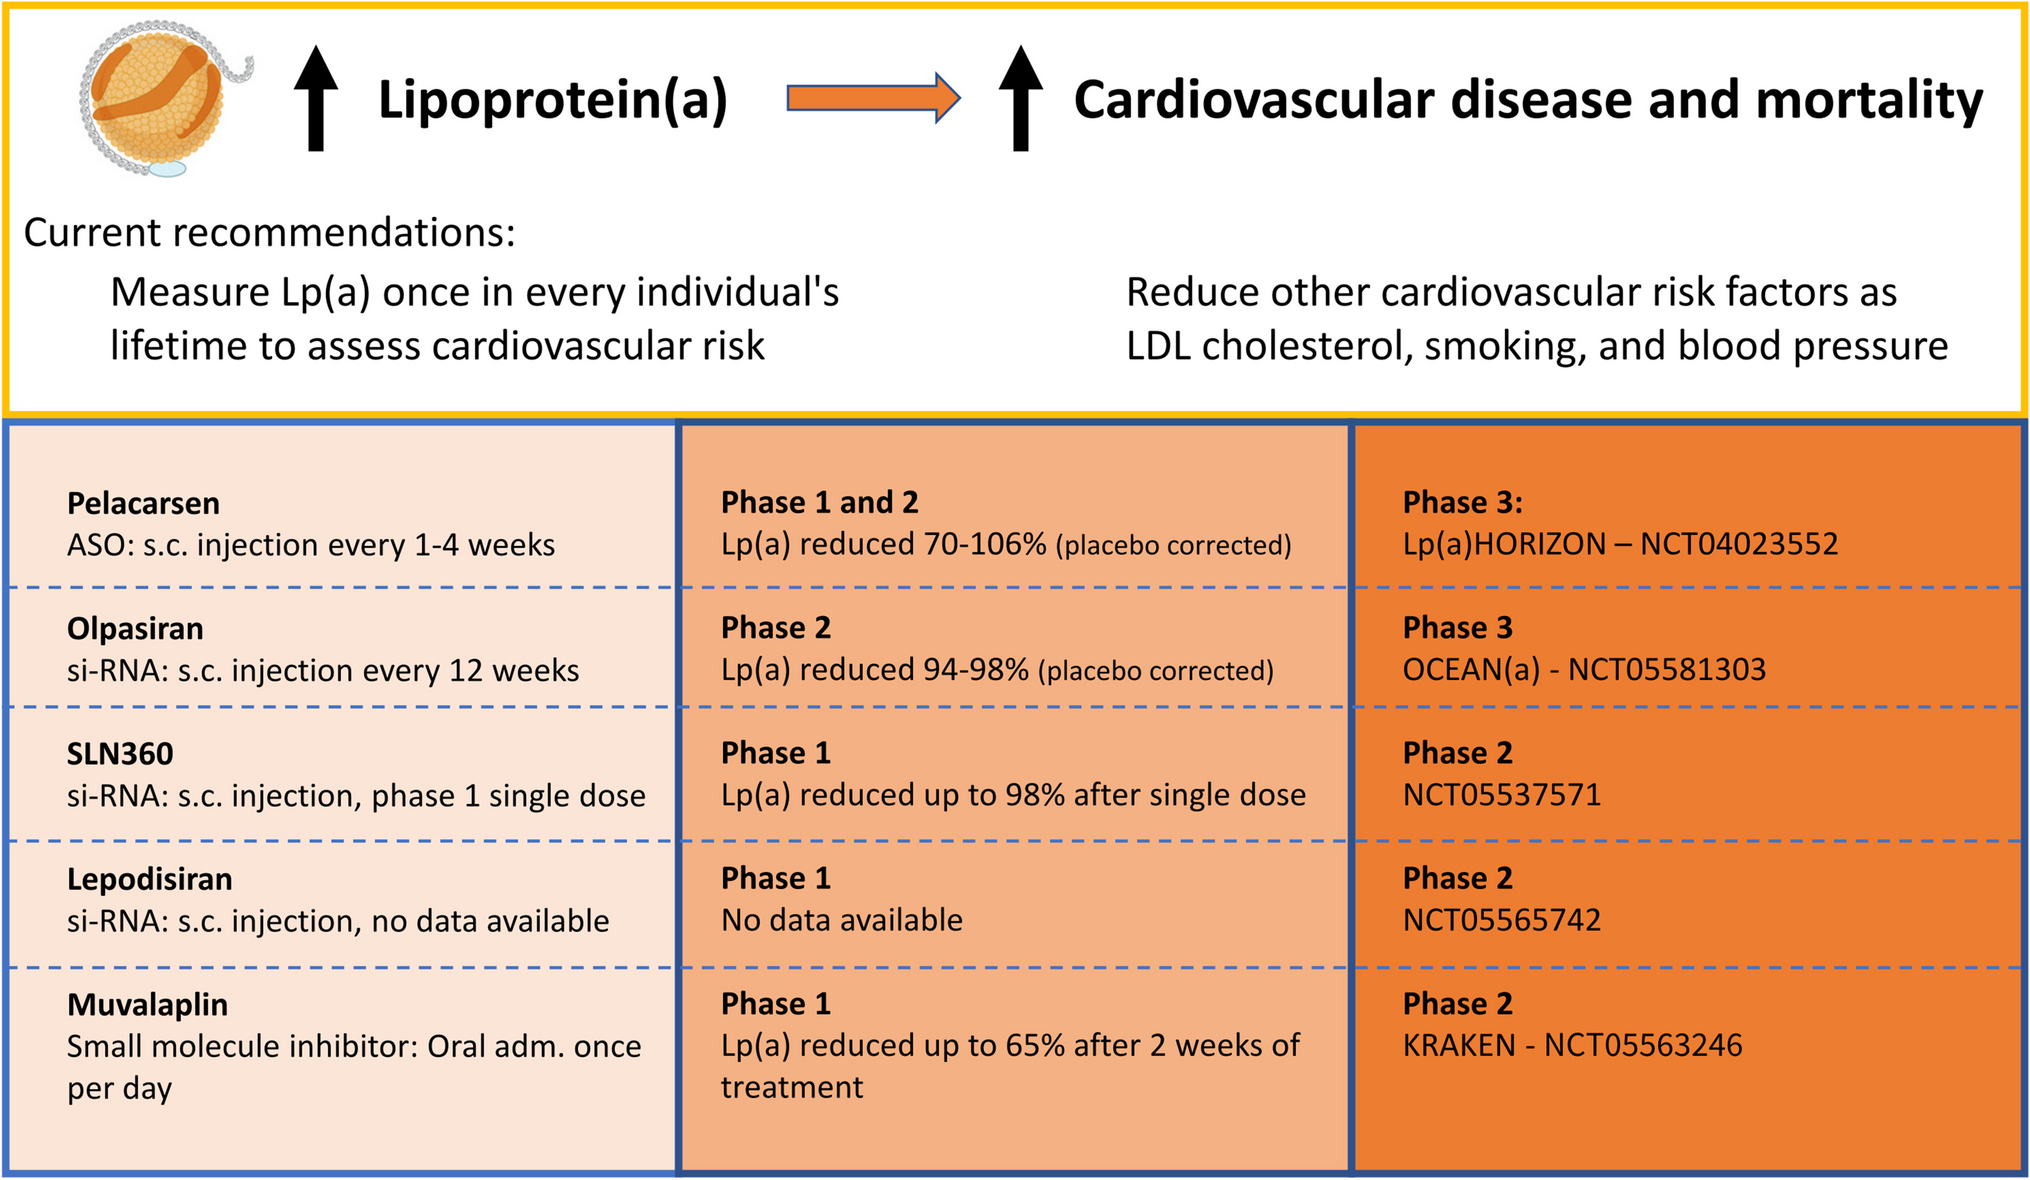 Novel Therapies for Lipoprotein(a): Update in Cardiovascular Risk Estimation and Treatment